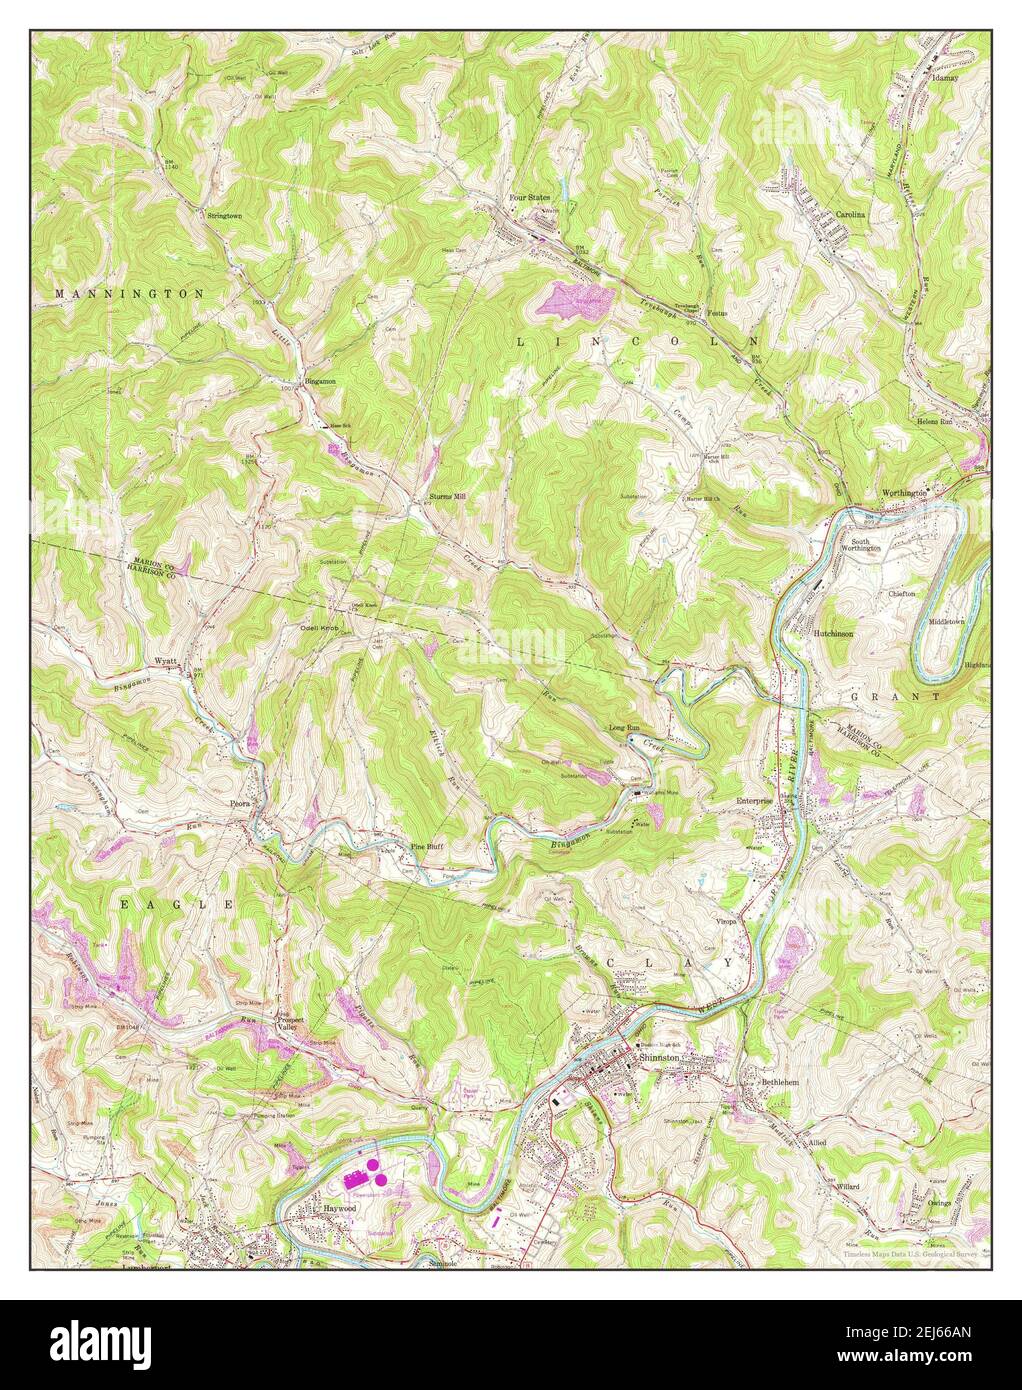 Shinnston, West Virginia, map 1960, 1:24000, United States of America by Timeless Maps, data U.S. Geological Survey Stock Photo